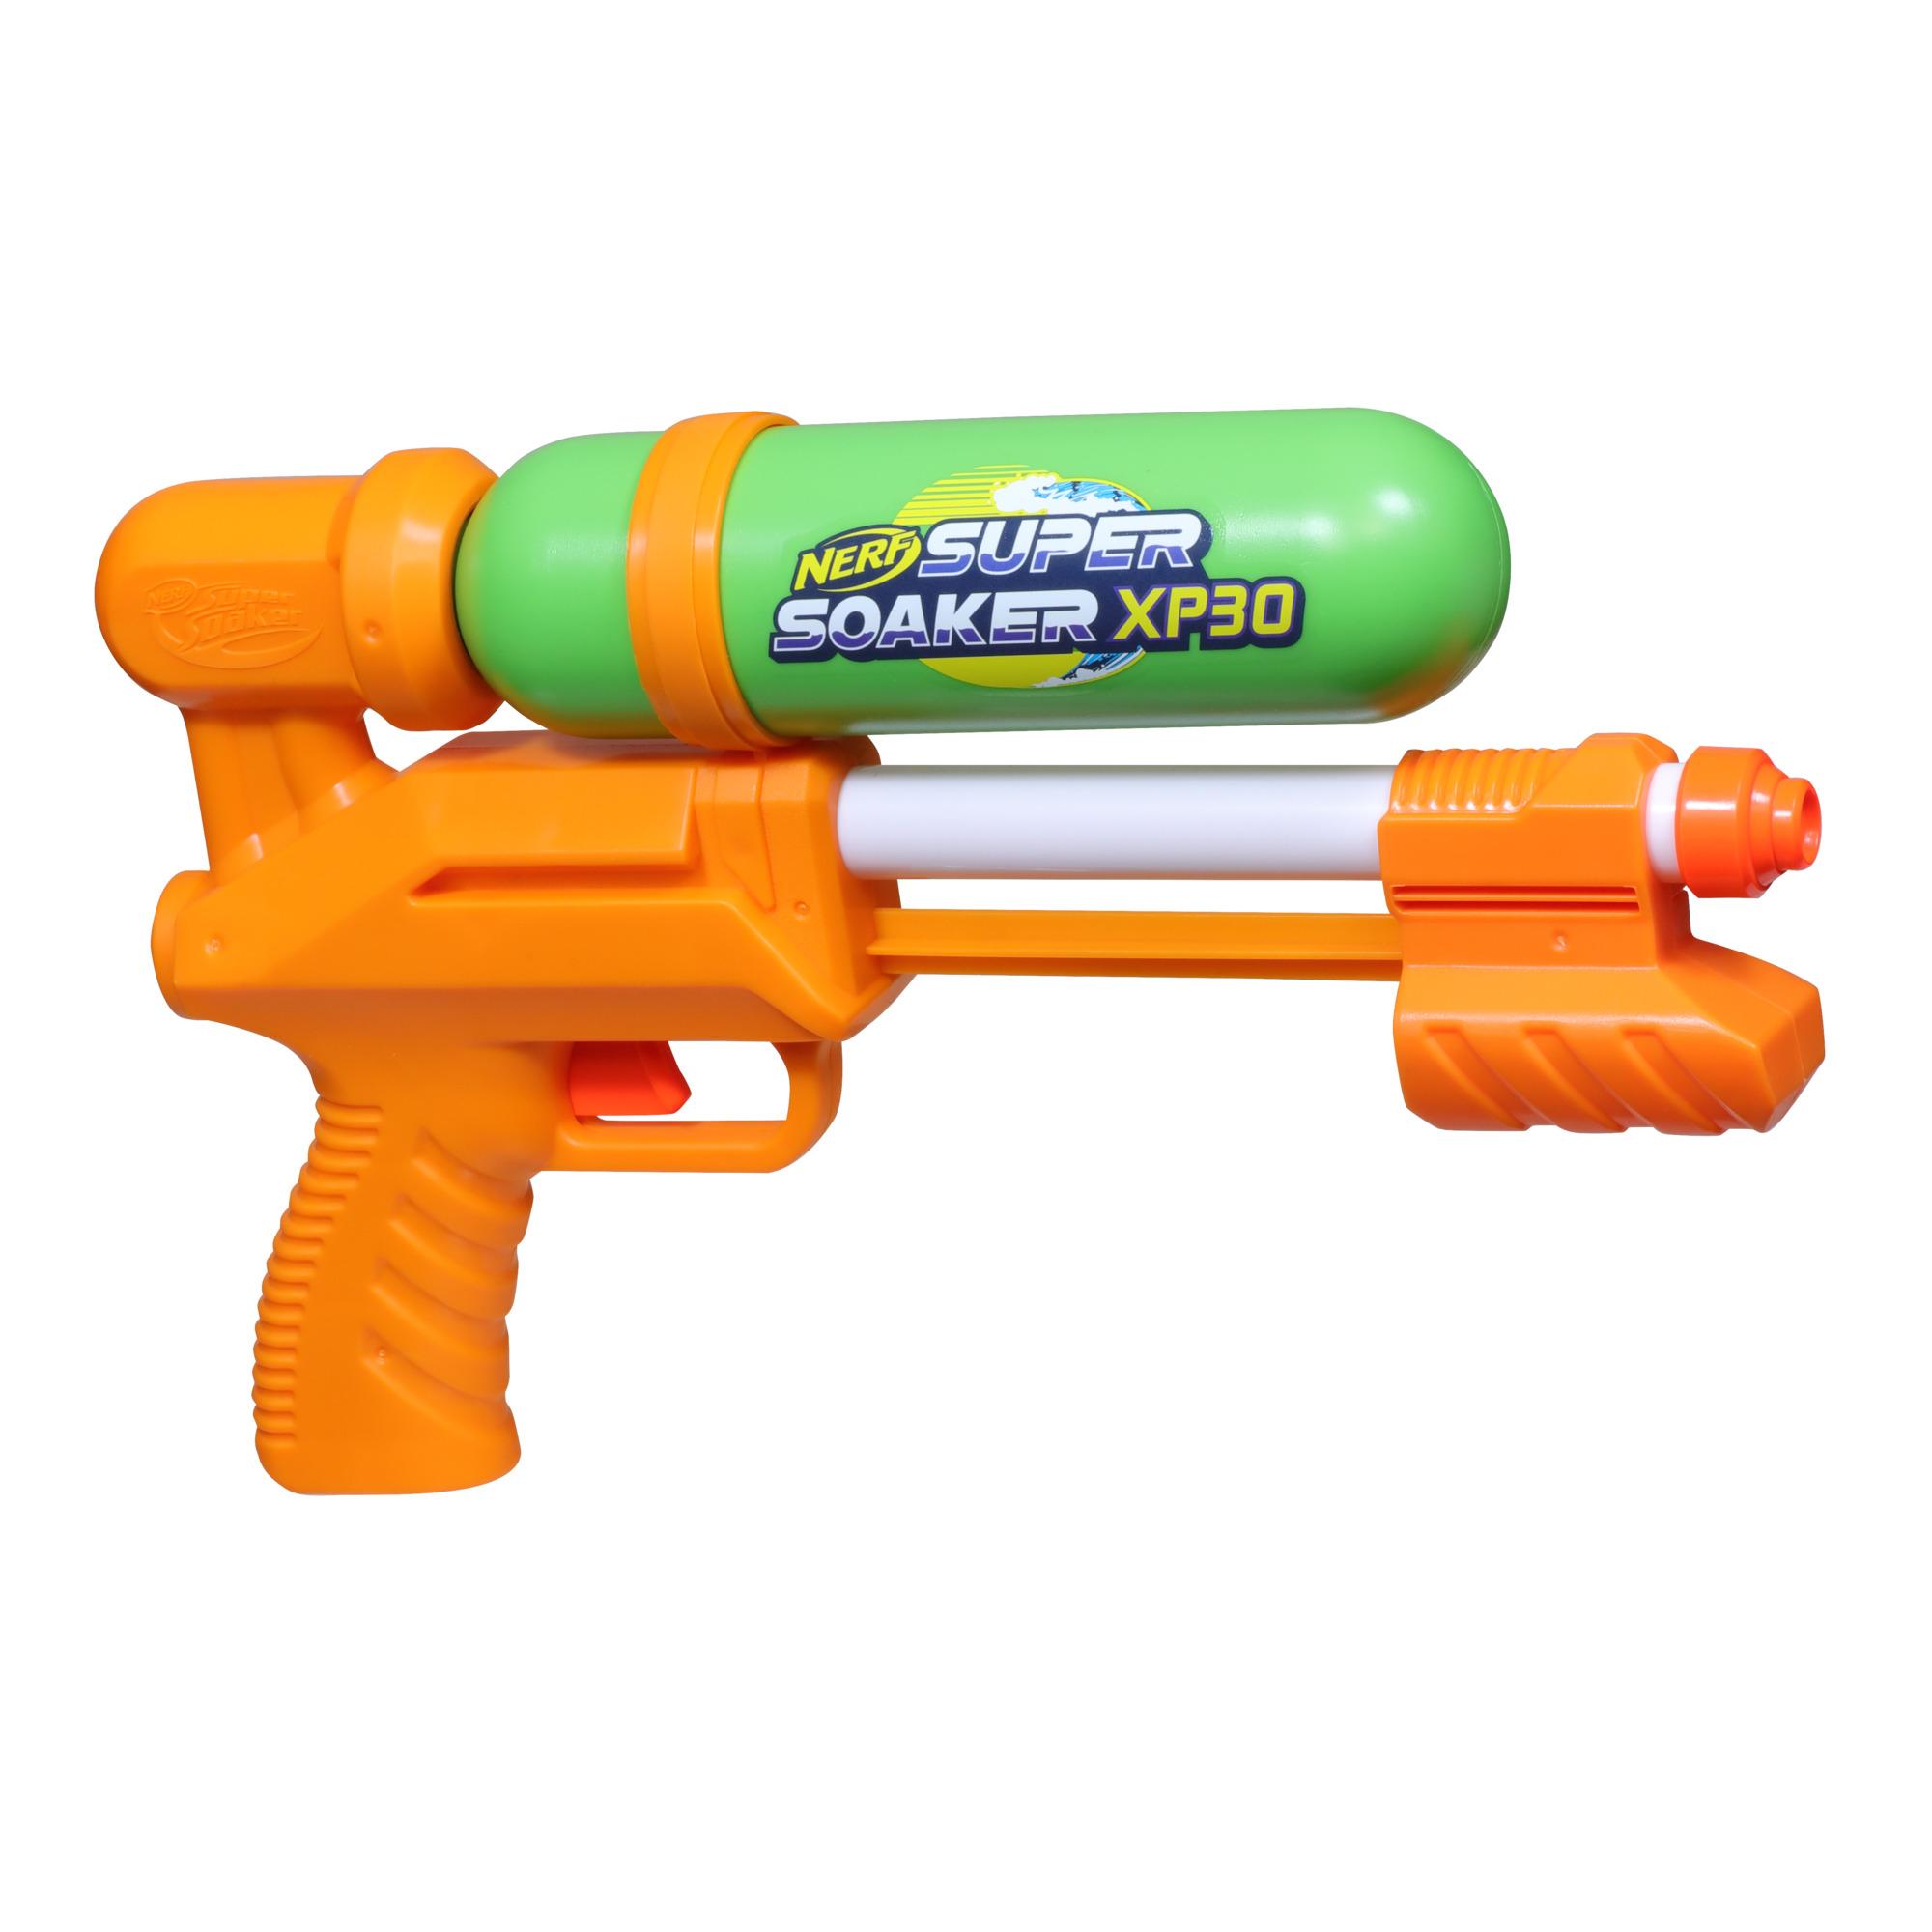 Nerf Super Soaker XP30-AP Water Blaster, Tank Made With Recycled Plastic, Air-Pressurized Continuous Water Blast